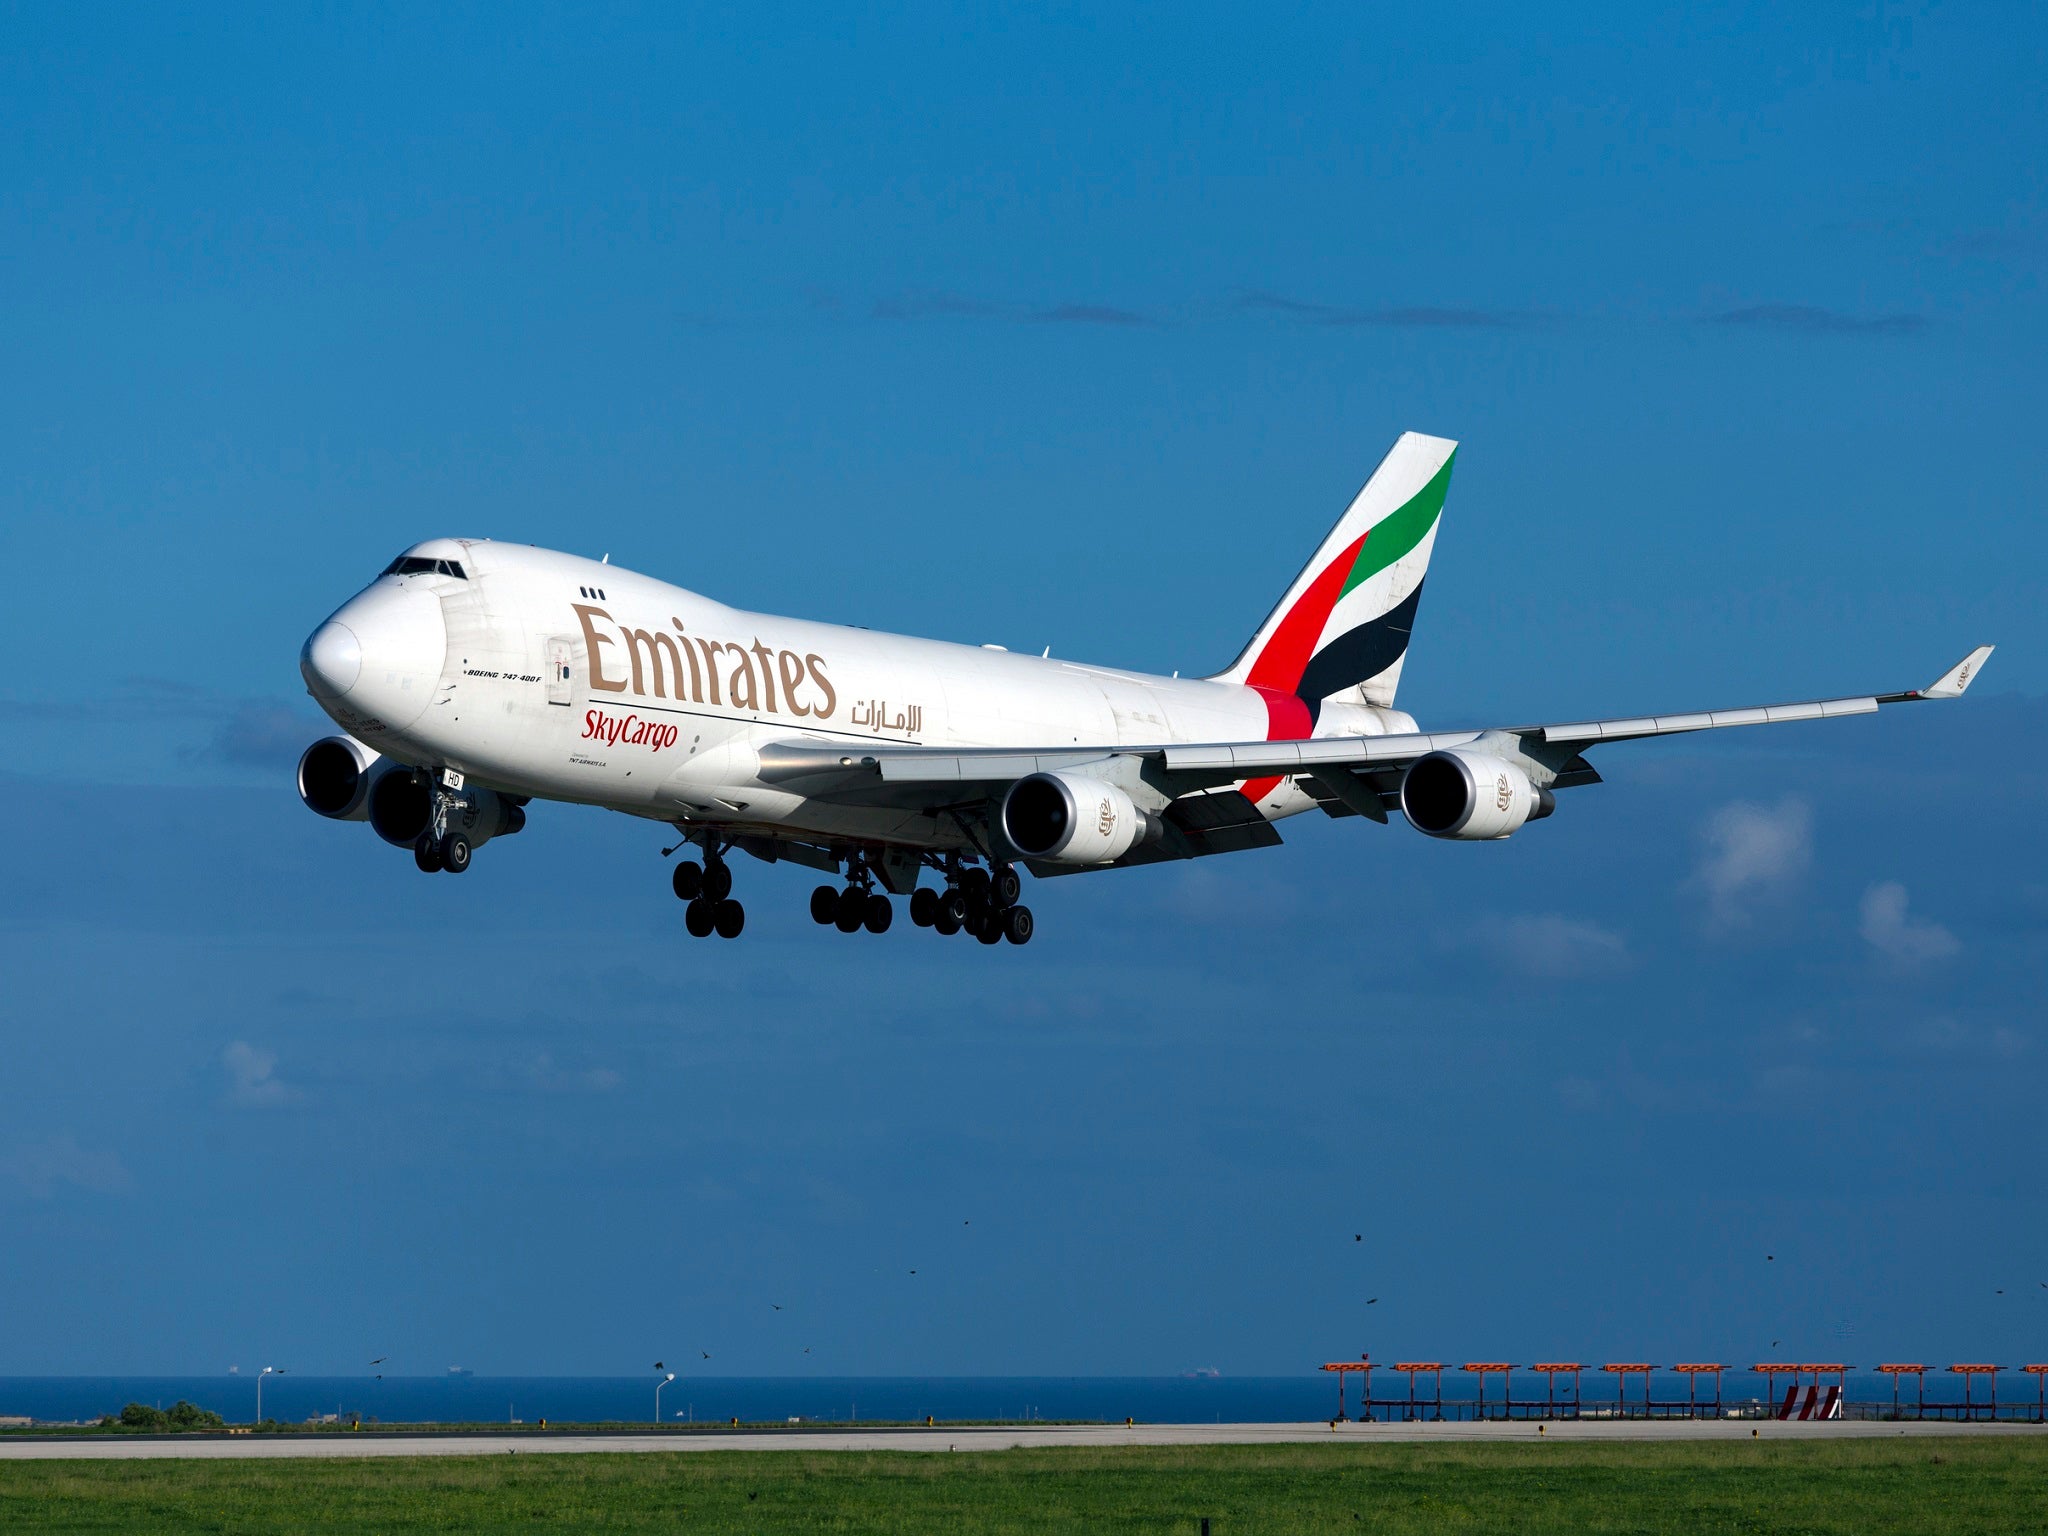 Emirates said it removed the passenger for their own safety